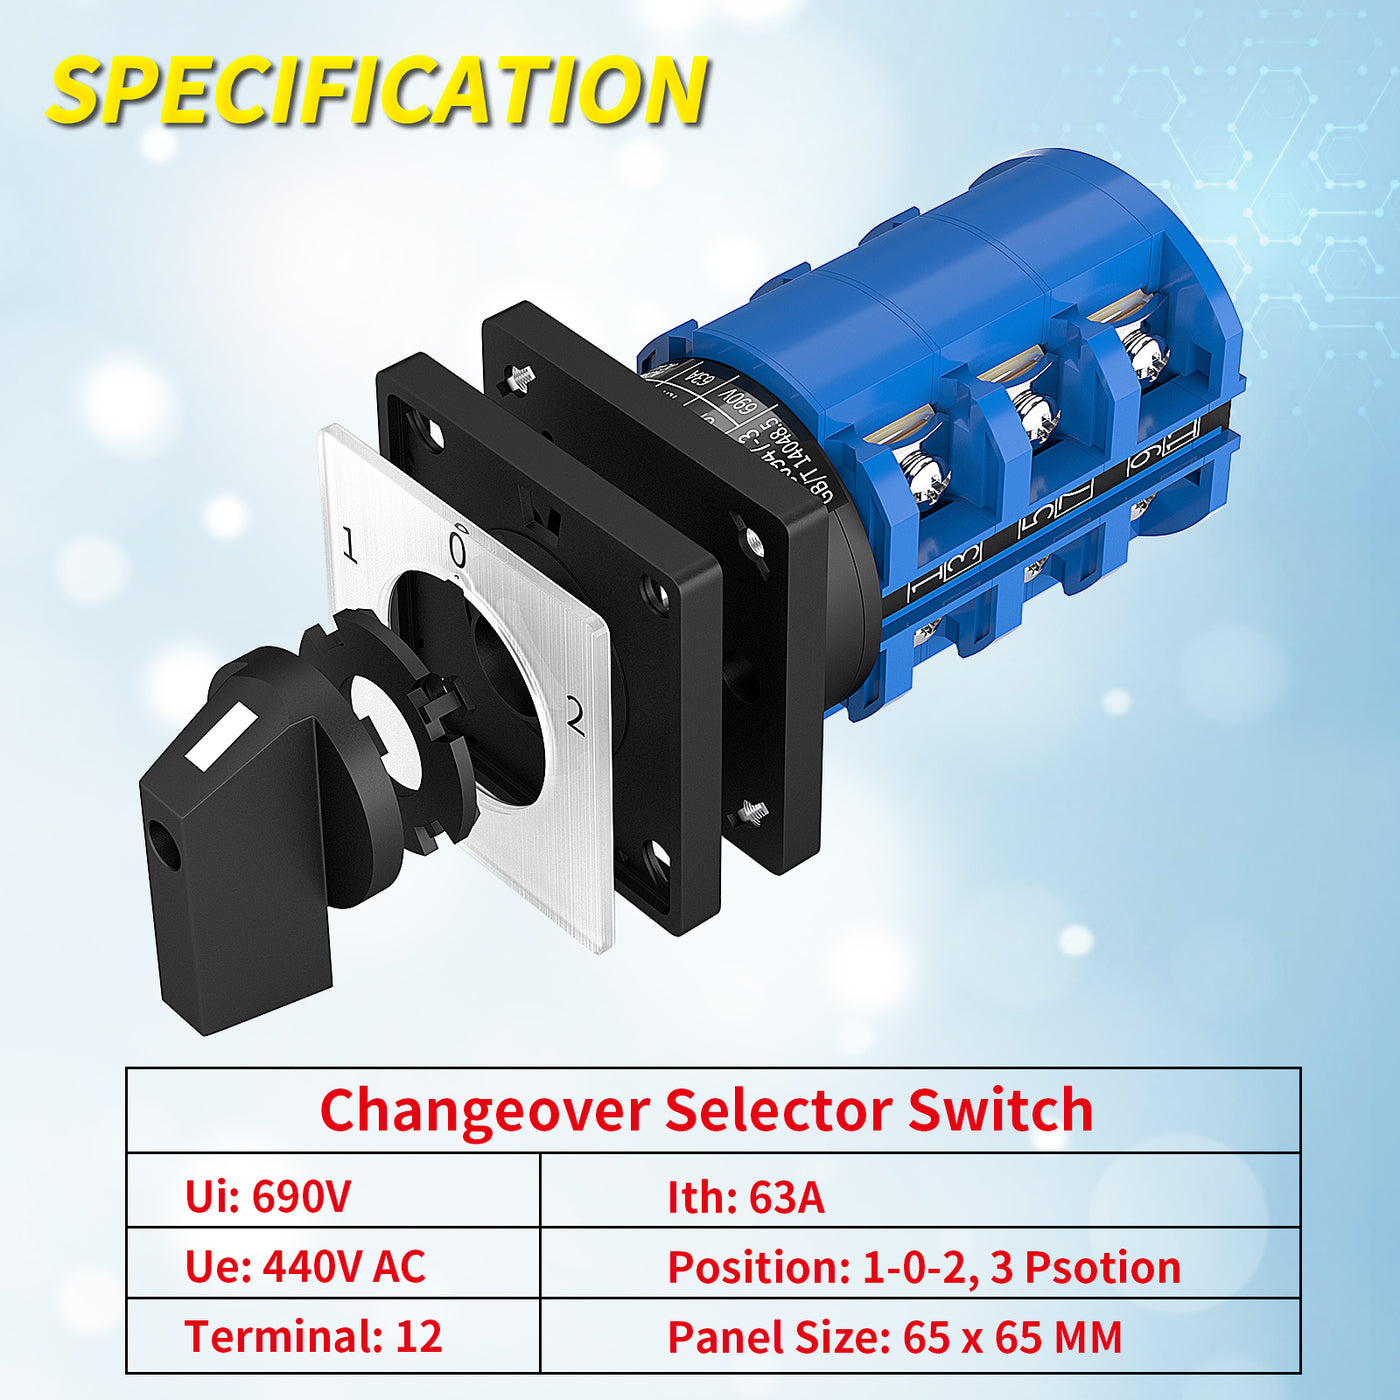 LW26-63-3 3 Position Changeover Selector Switch Specification